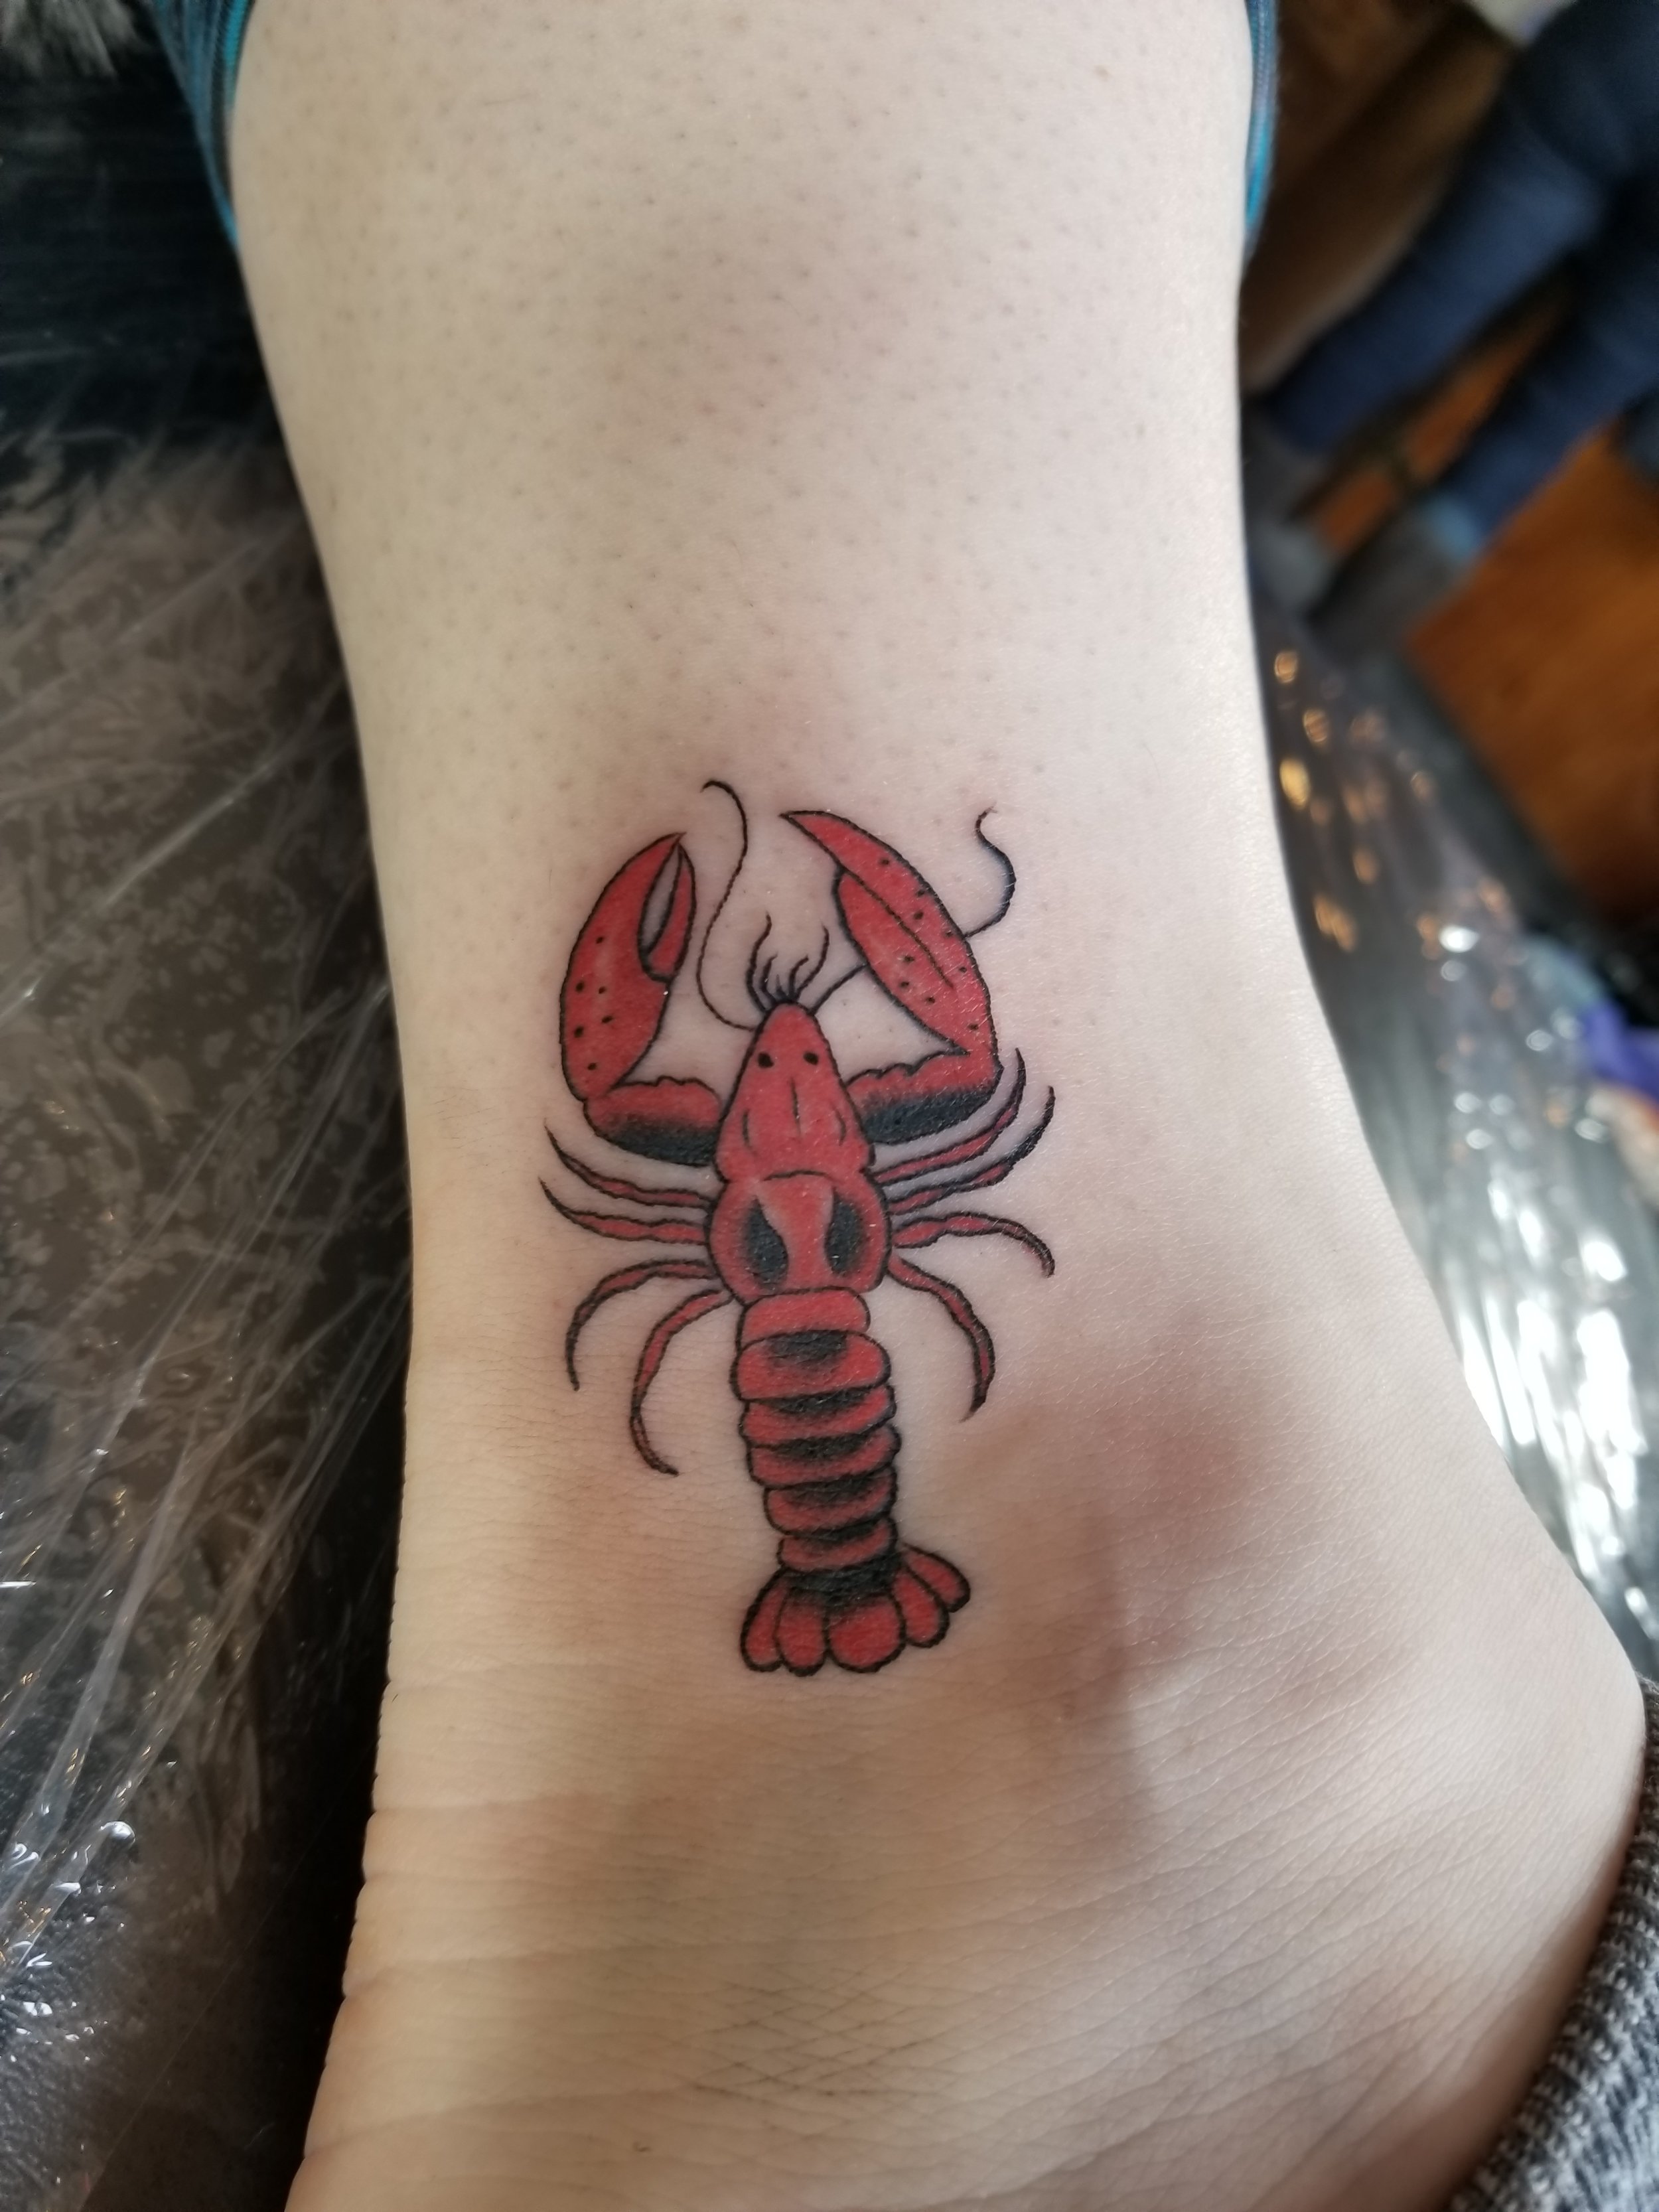 1081 Lobster Tattoo Images Stock Photos  Vectors  Shutterstock